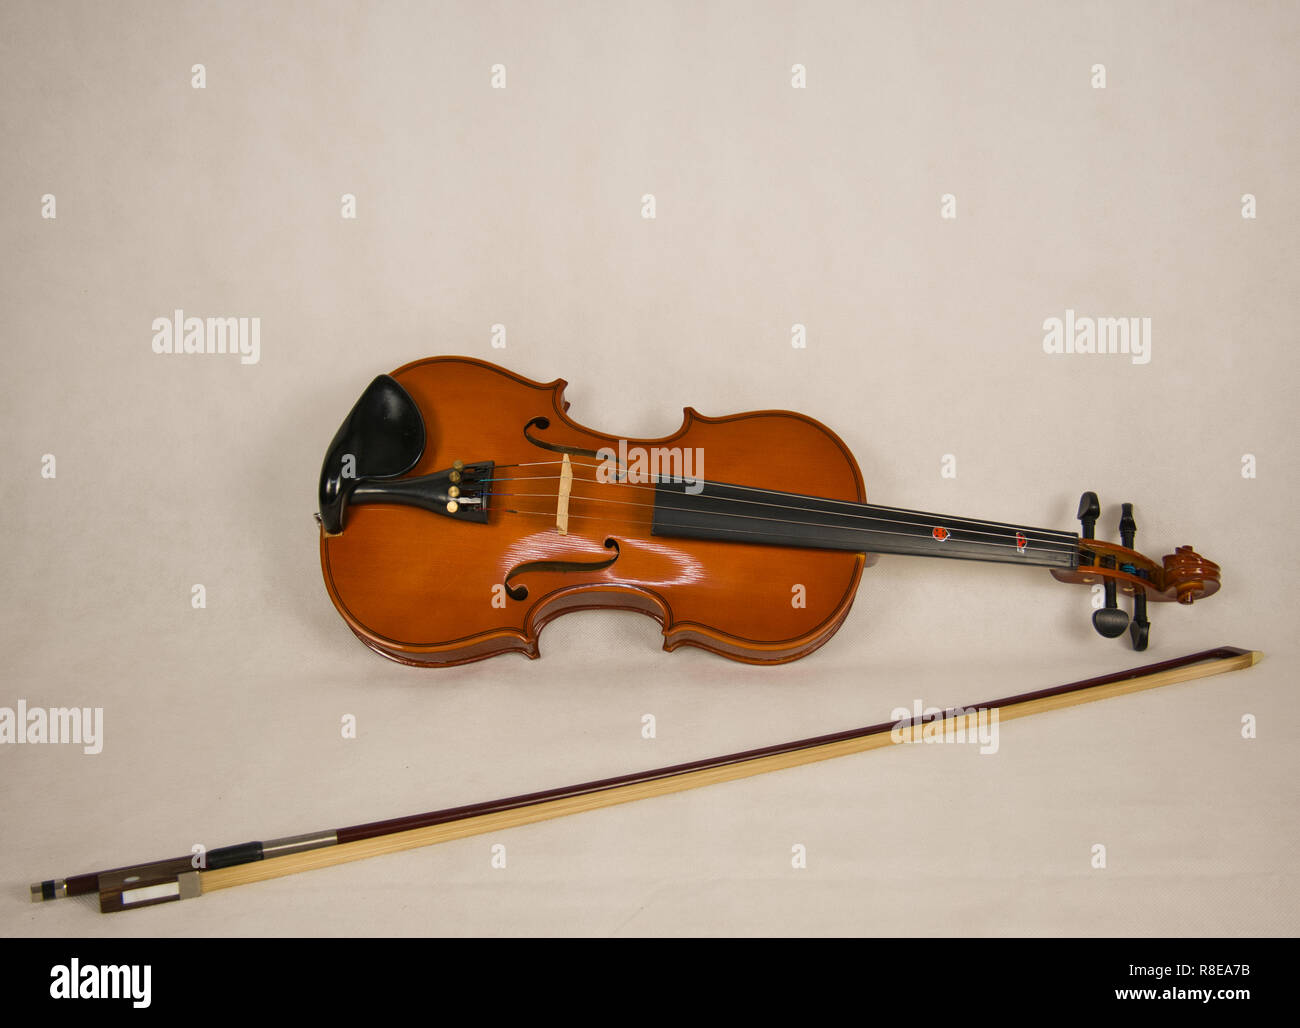 A brown violin with four strings and a violin bow on a white background Stock Photo